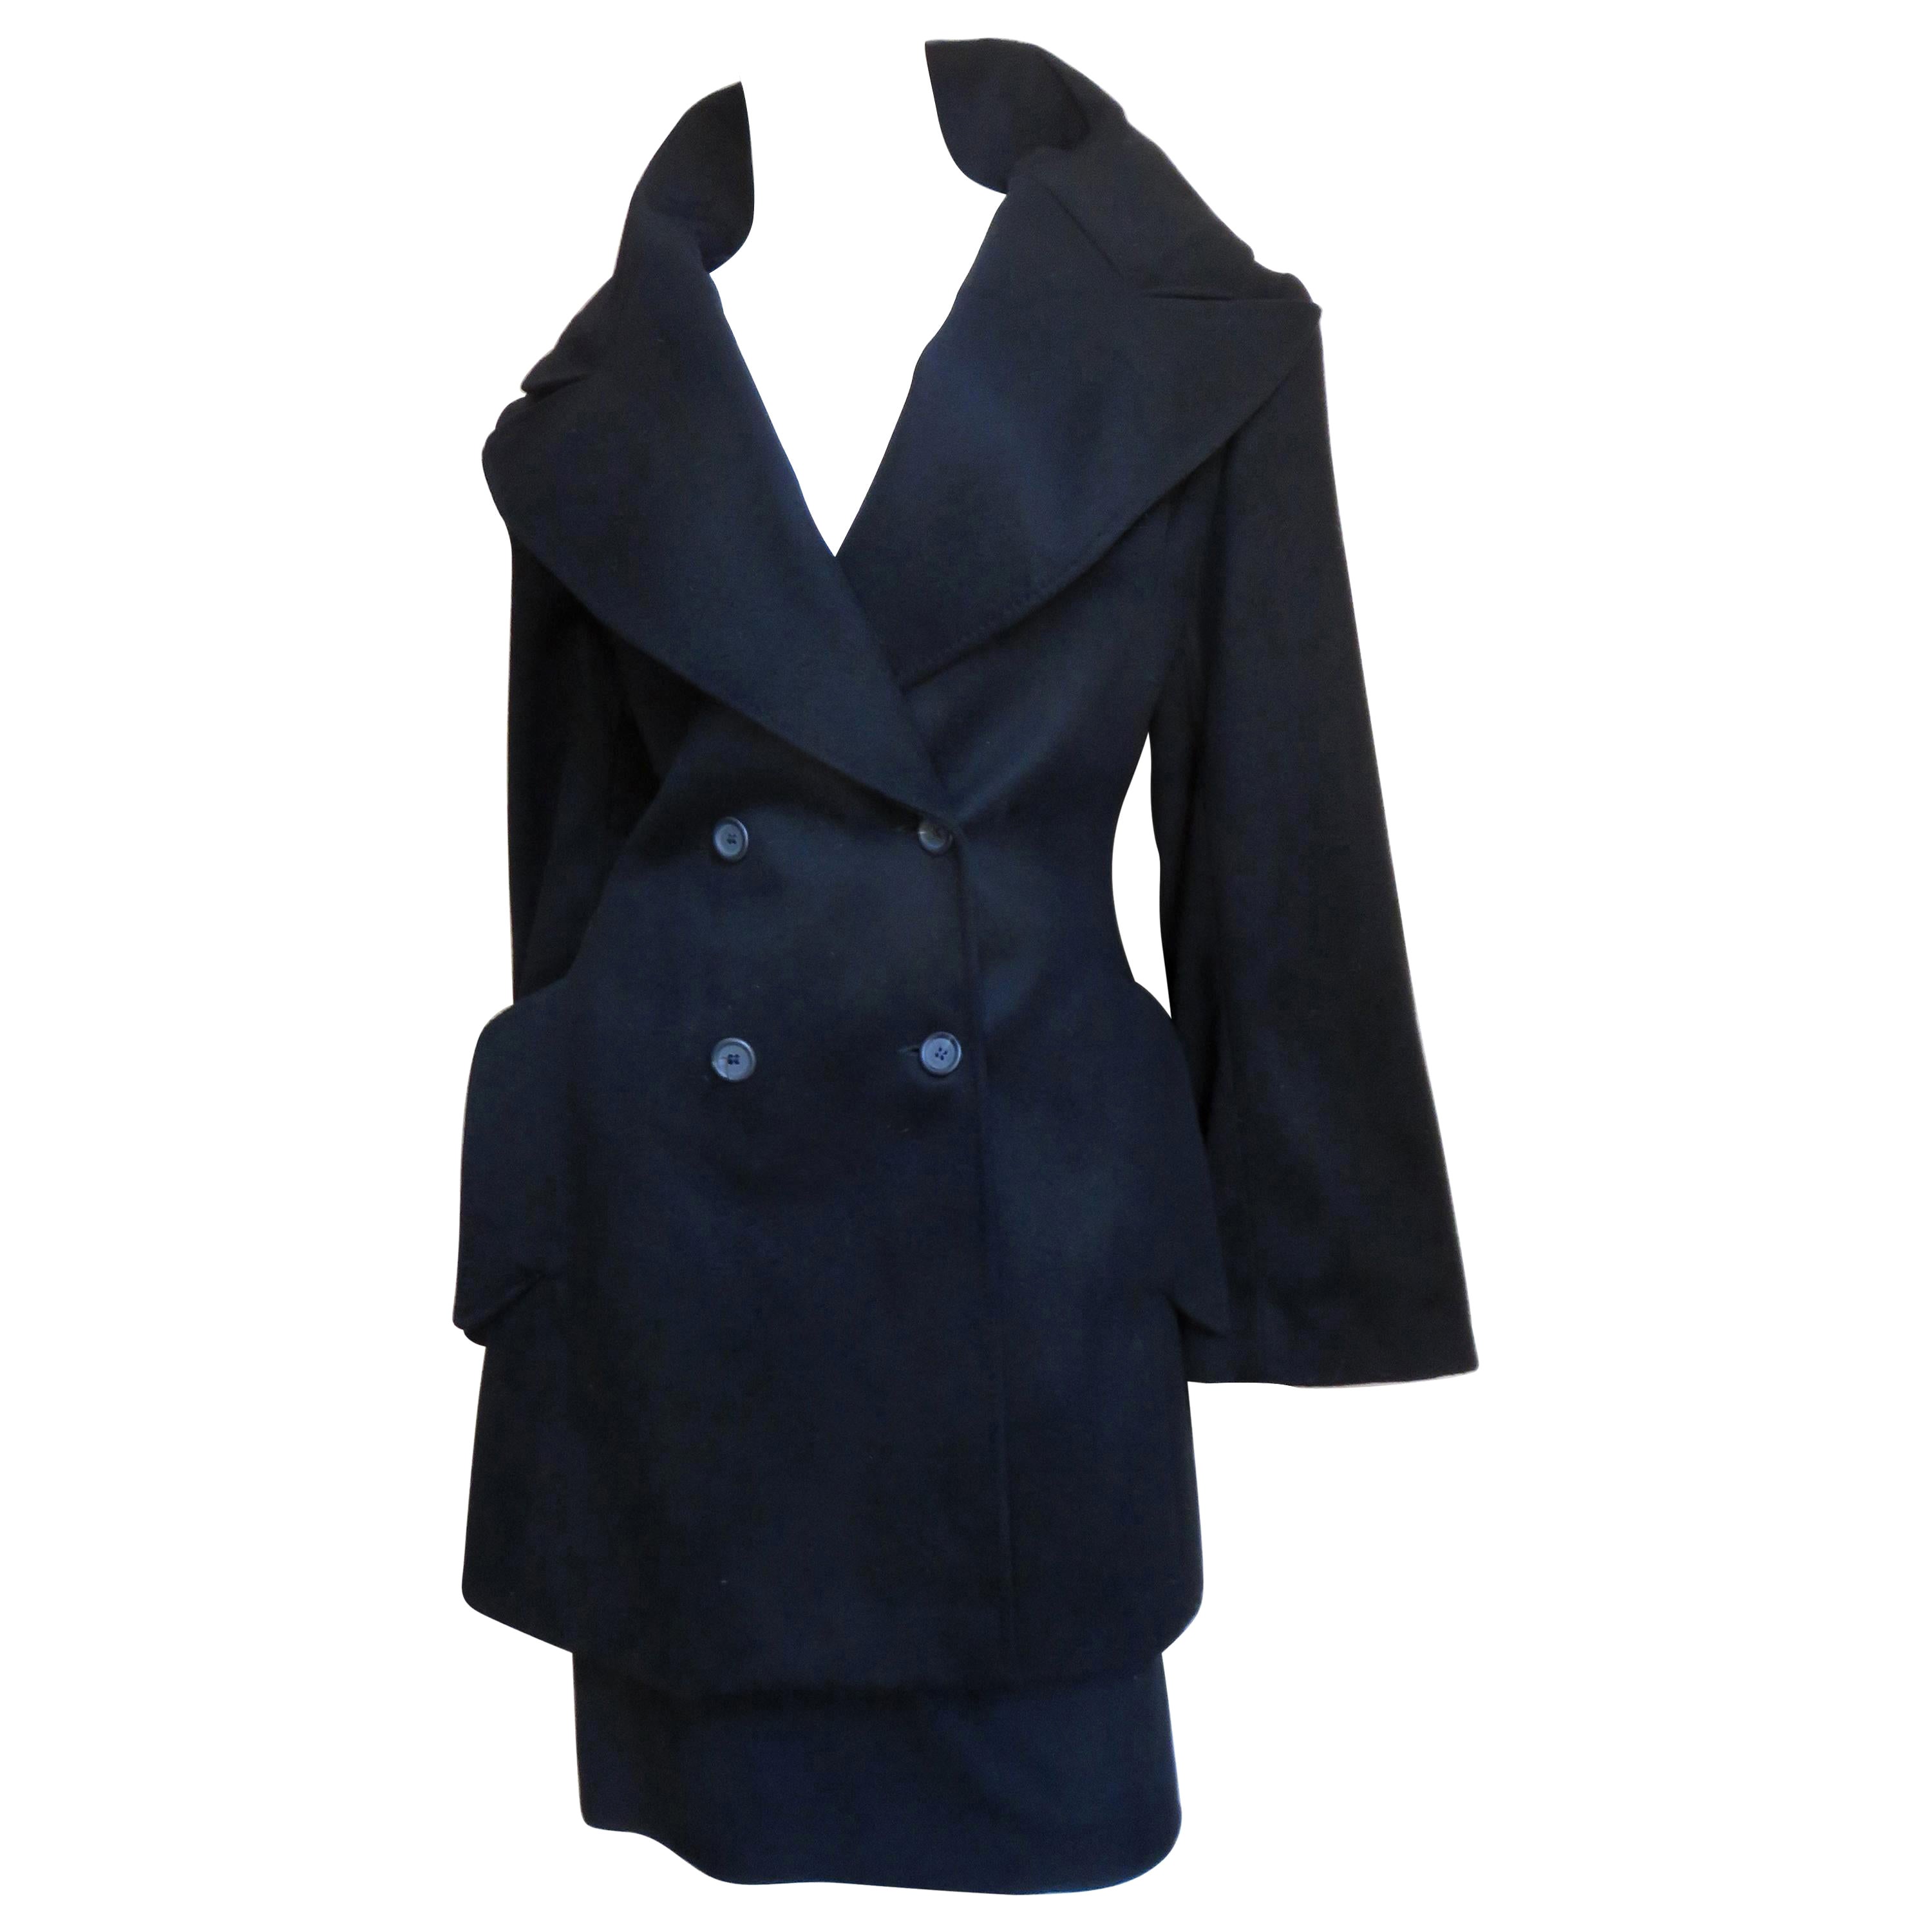 Alexander McQueen New Cashmere Popped Lapel Collar Jacket and Skirt A/W 1999 For Sale